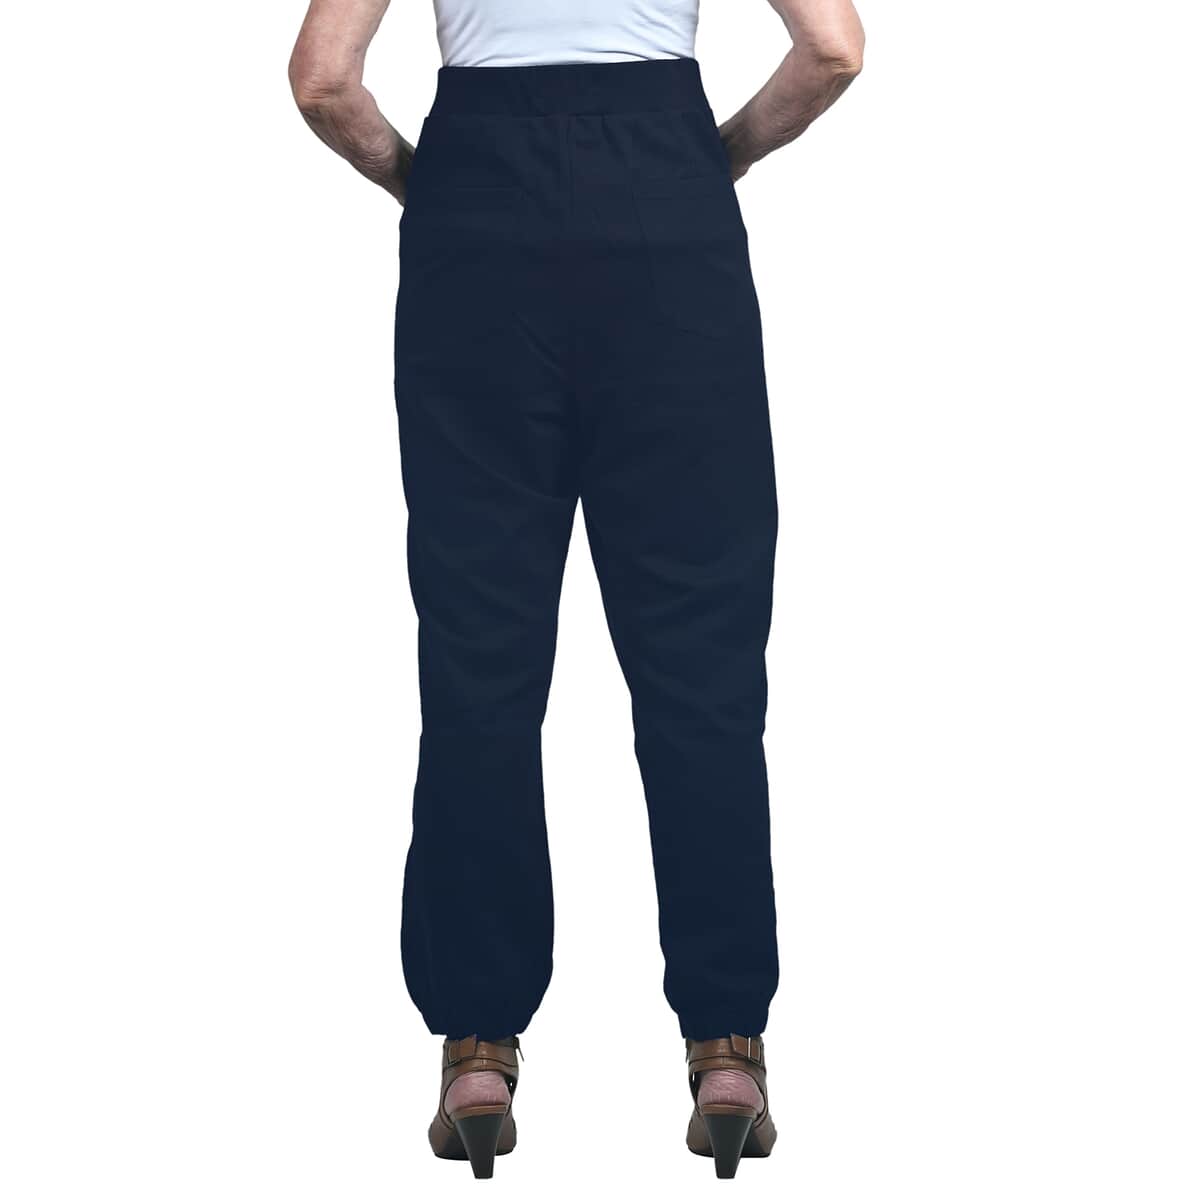 DUBGEE Navy Elastic Drawstring Waist Solid Stretch Woven Jogger Pant- 1X image number 1